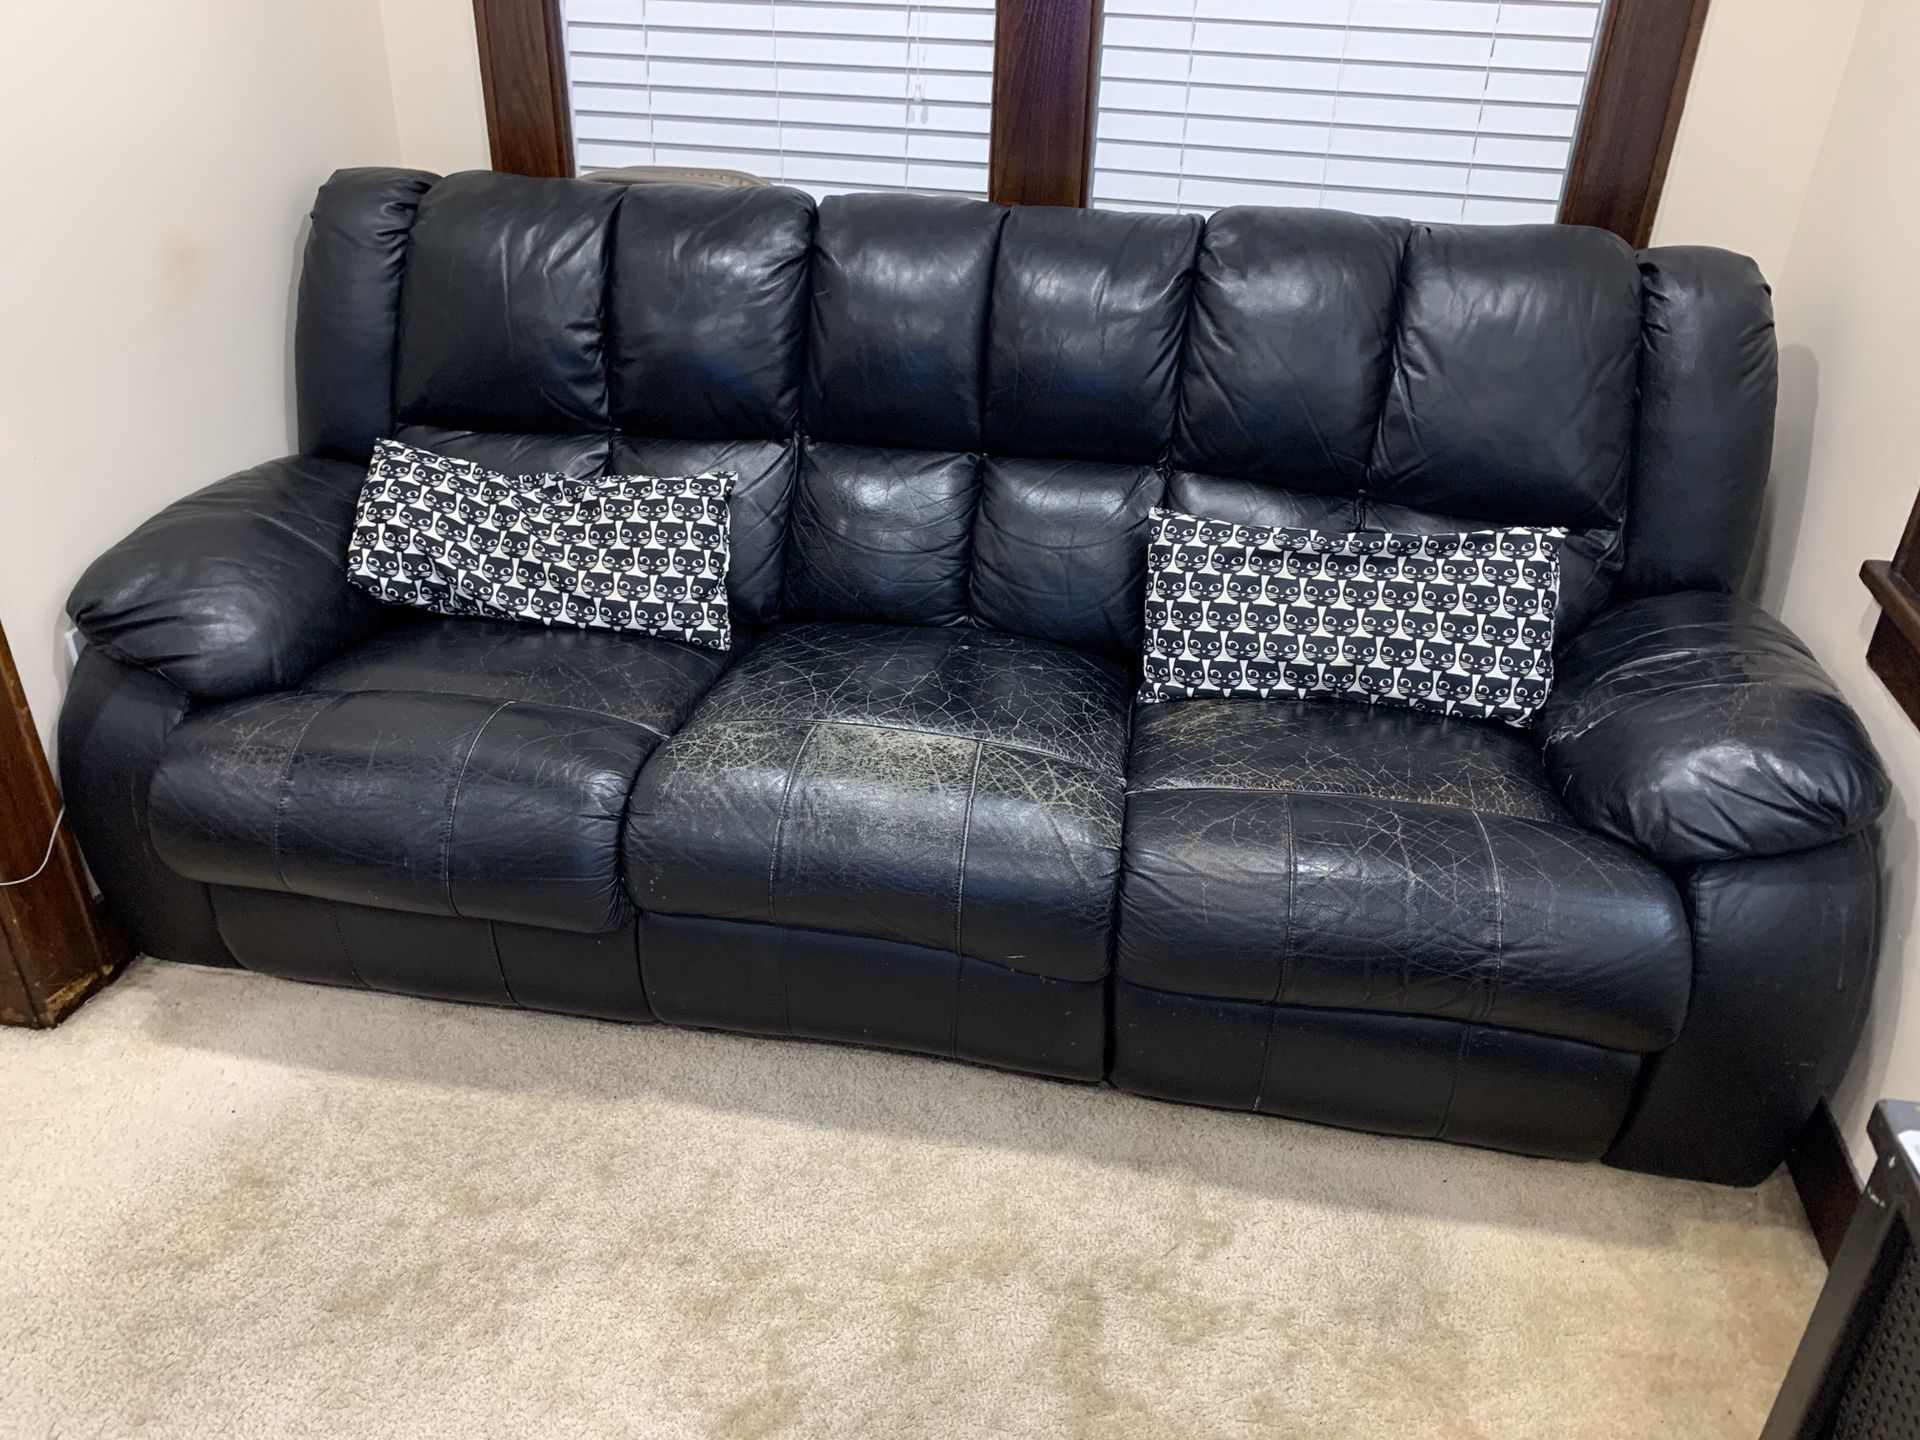 Free leather couch. Still reclines. Leather is cracking and has some tears. But has served the family well.